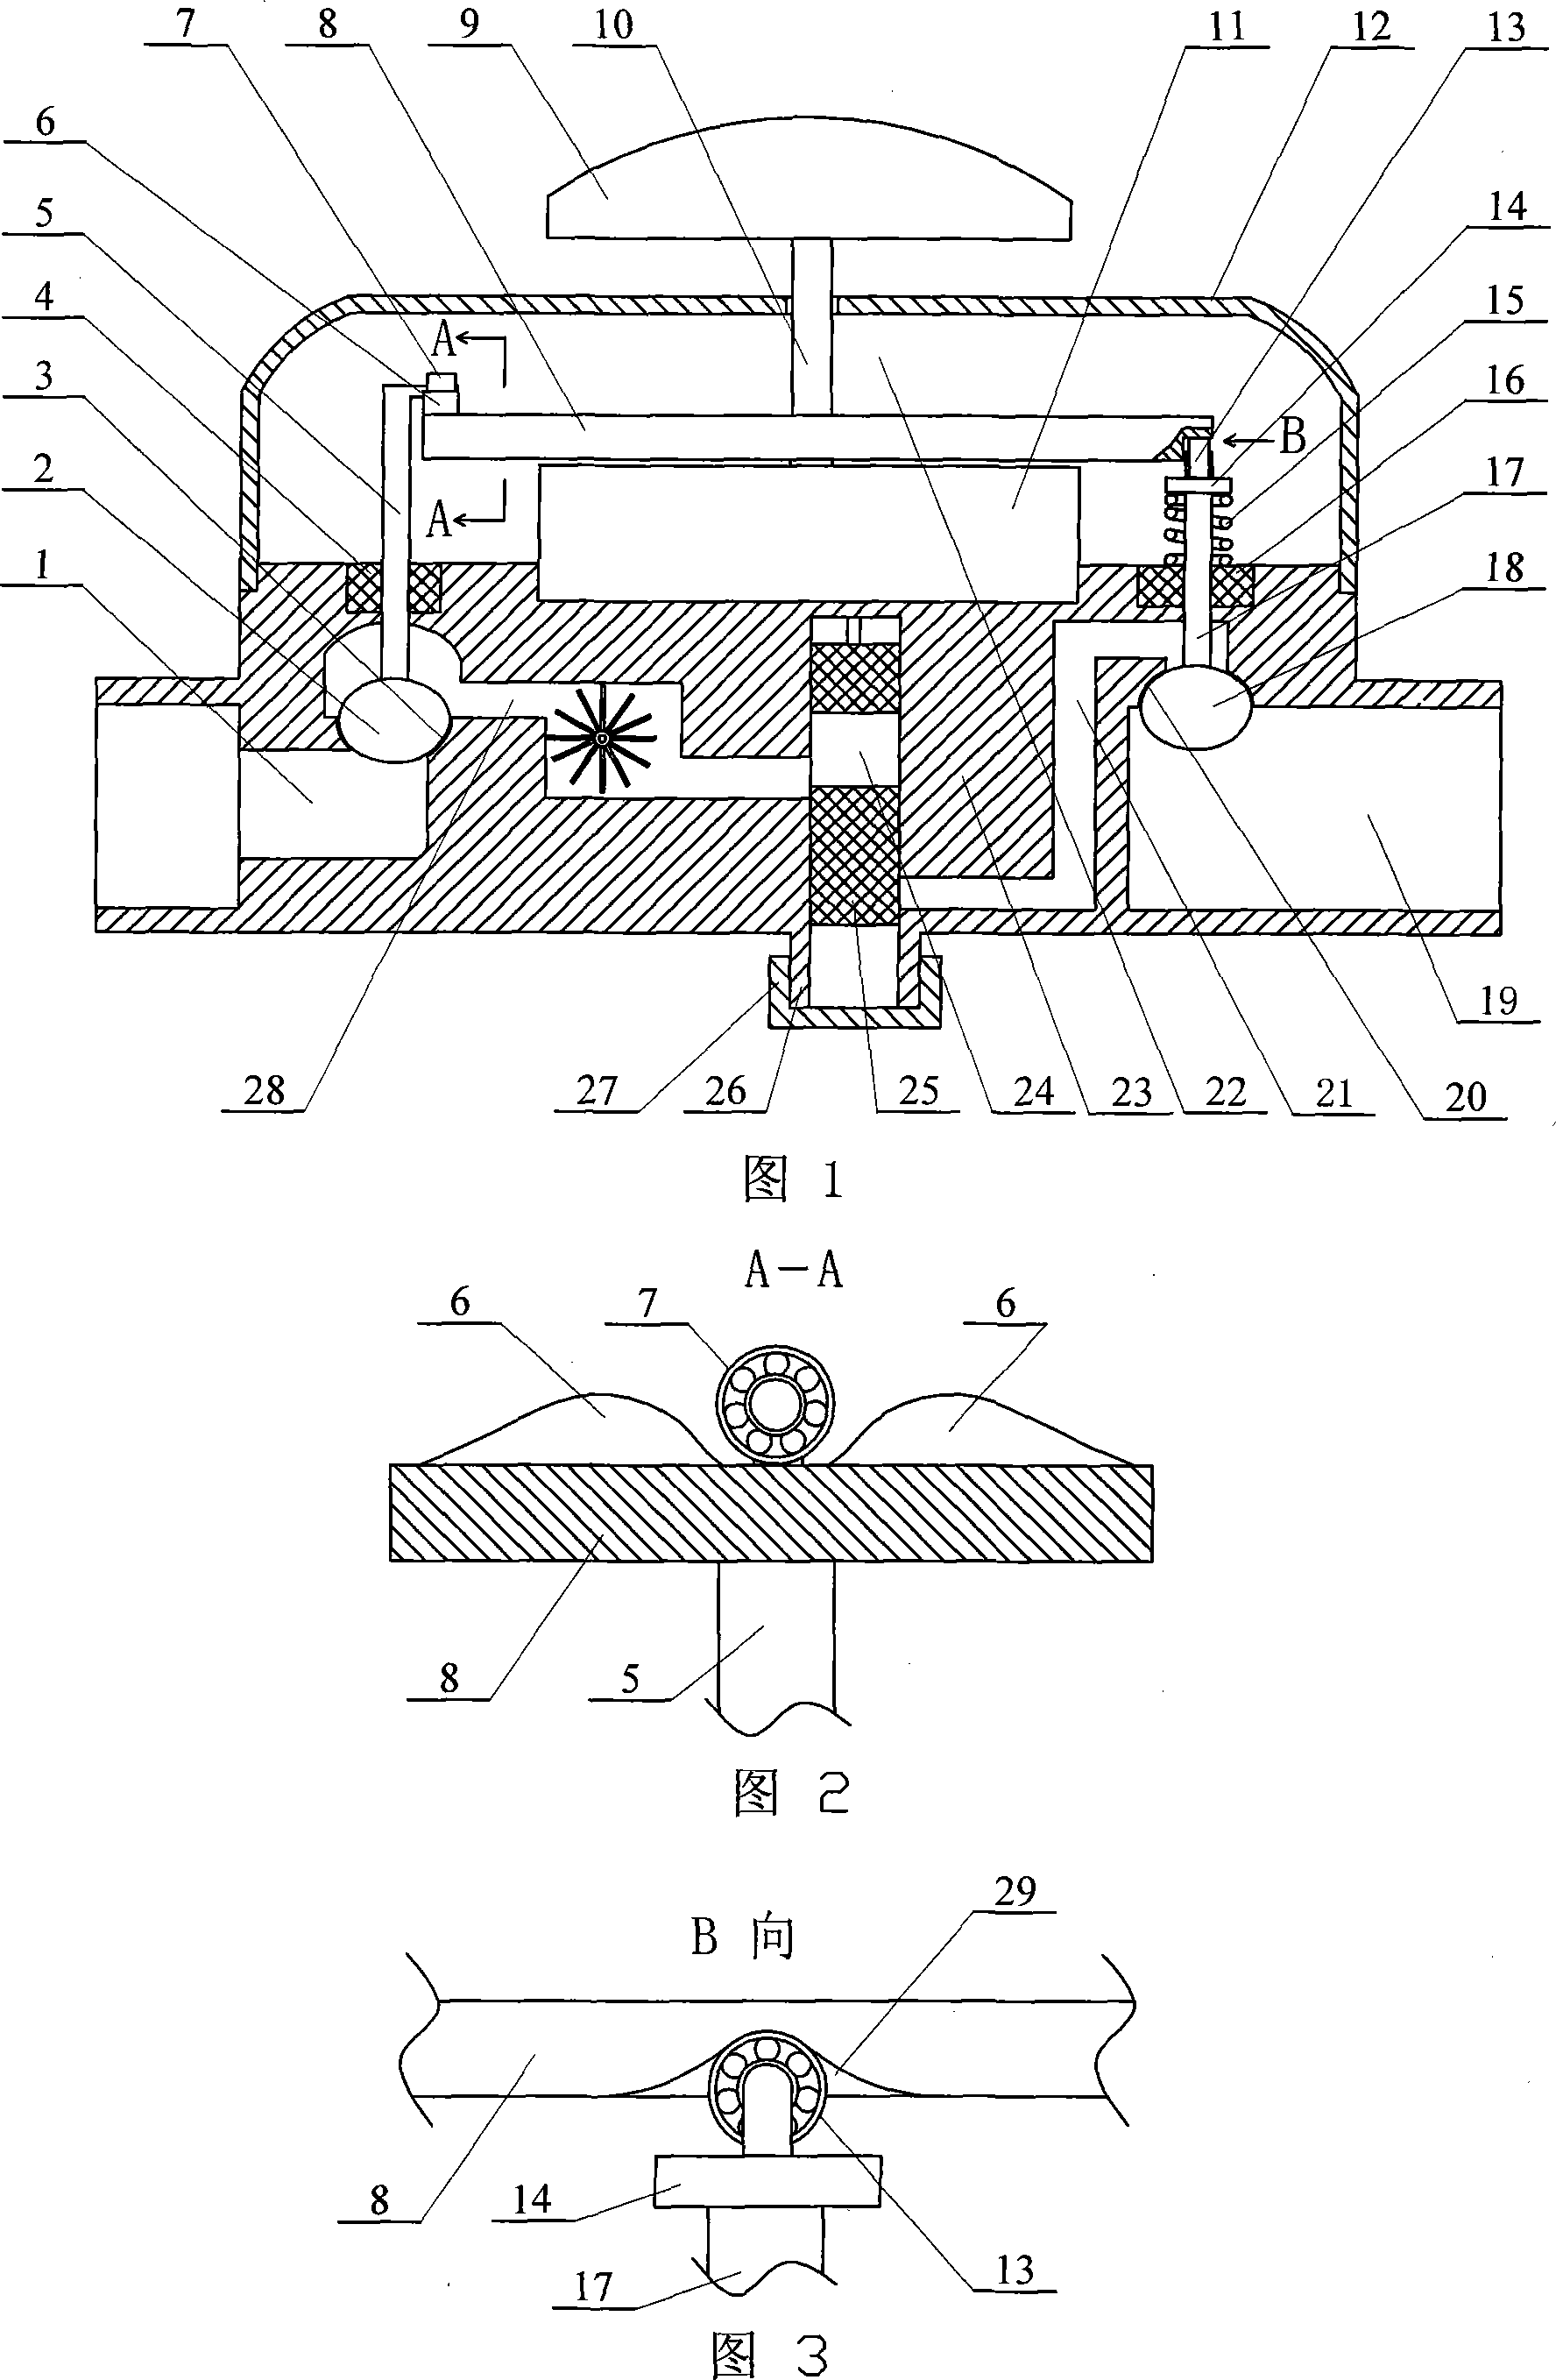 Valve ball control device for timing, quantitative, water-stopping self-closing water tap